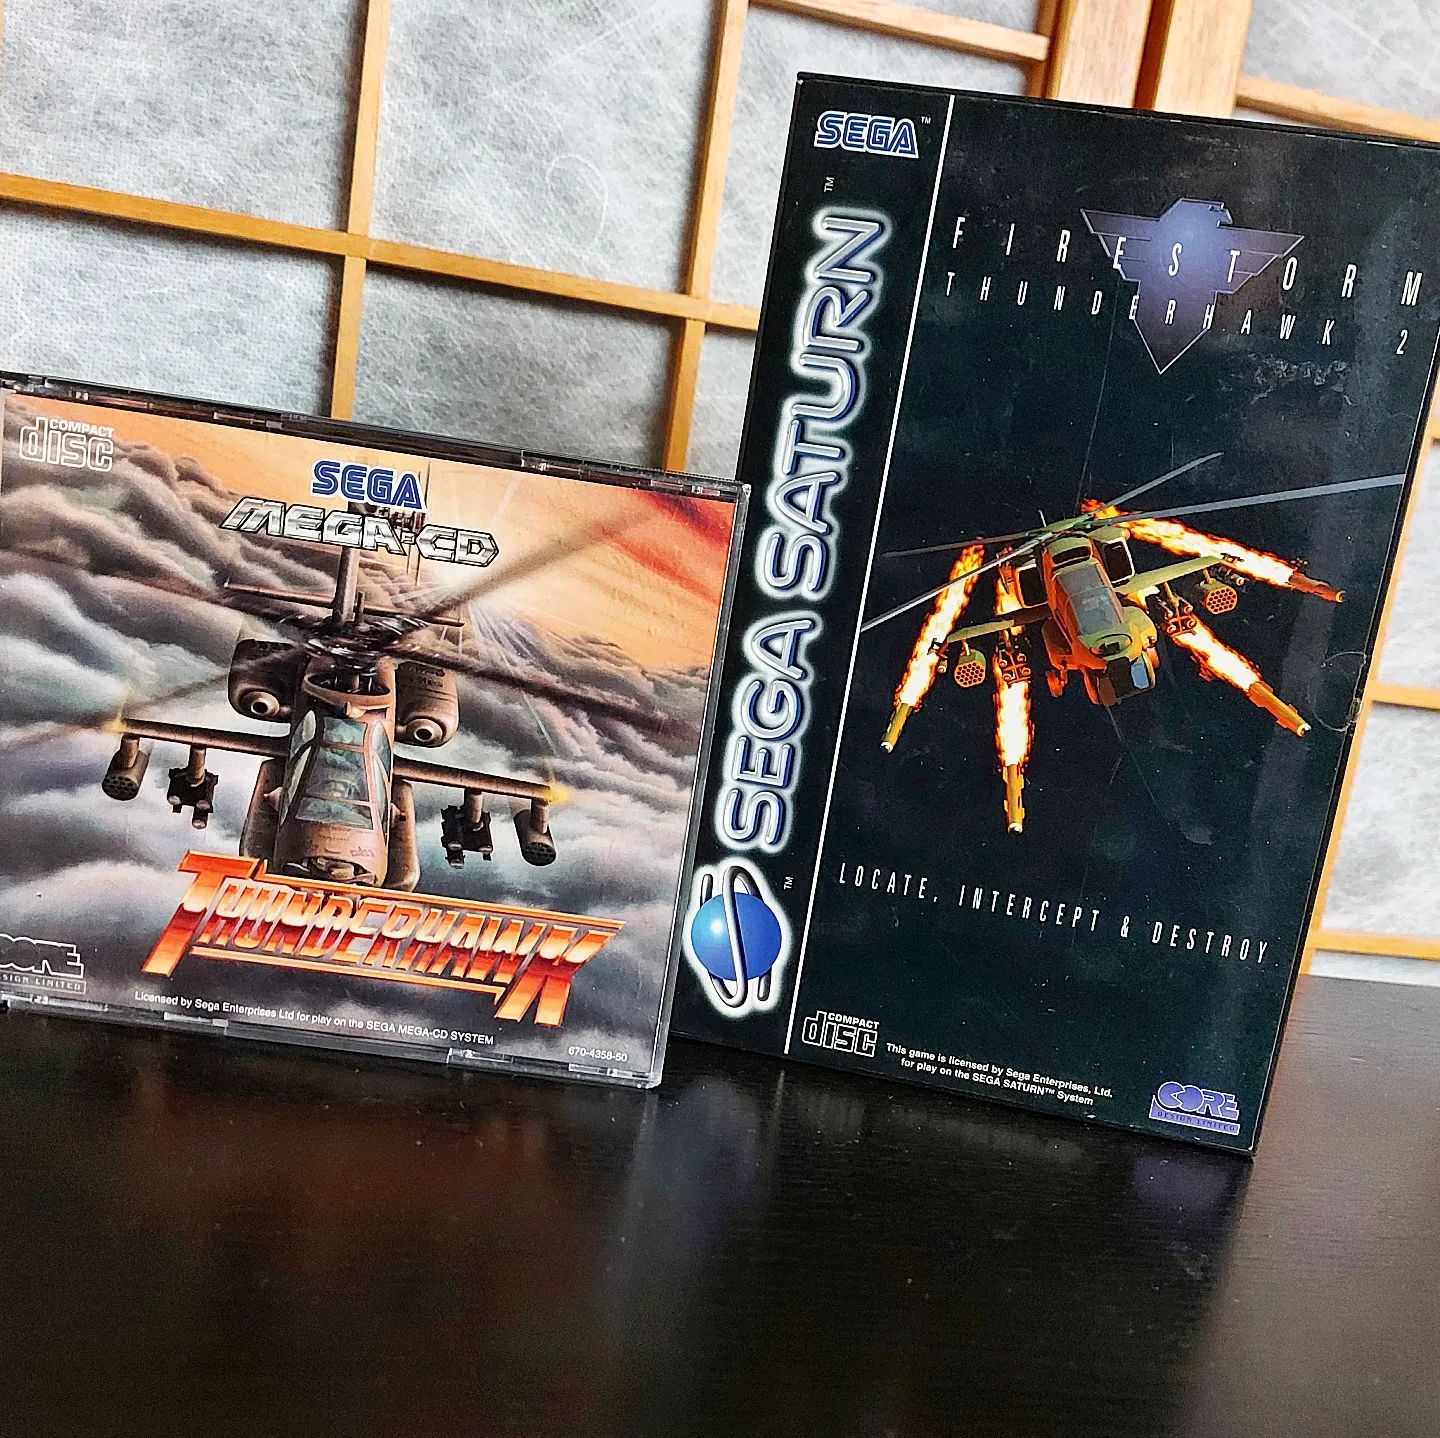 I'm gonna keep on Sega'in' with some Thunderhawk 1 and 2! These games do take some time to get into, but they're quite good. Also, are these kind of games being made today? Not, if at all, unfortunately!

Thunder in a title or regarding to a vehicle is of course always the buzzword for success. Just look at the amazing Thunder in Paradise, a TV series with Hulk Hogan about a stealth speedboat 👌🏾.

Firestorm as a title added to Thunderhawk of course blew all synapses back in the 90s by just reading that combination of words. 

#retrogamepapa #gaming #gamecollector #gamecollecting #retrogames #retrogamecollector #sega #segacd #megacd #saturn #segasaturn #helicopter #thunderhawk #firestorm #90s #90sgaming